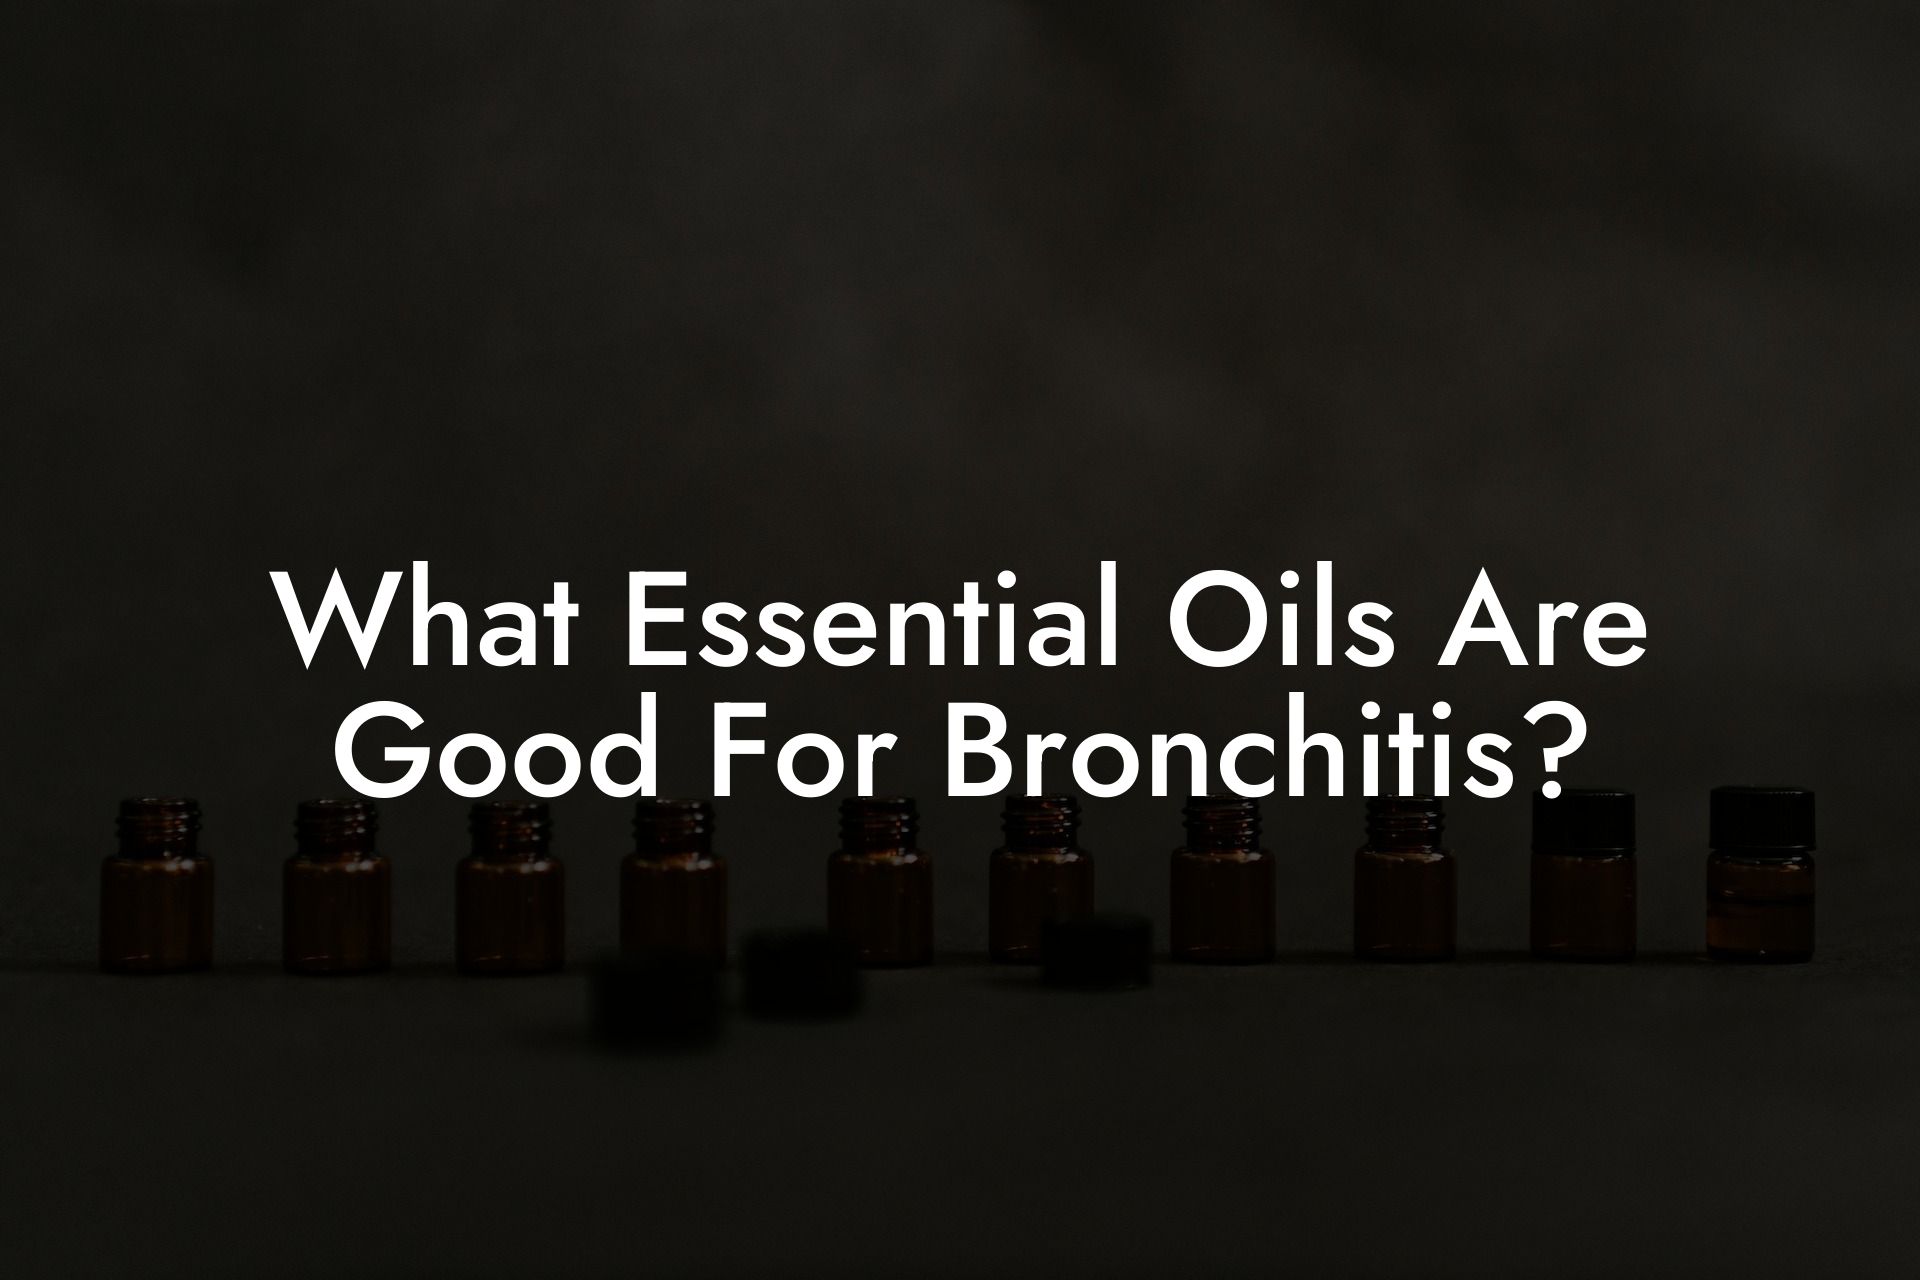 What Essential Oils Are Good For Bronchitis